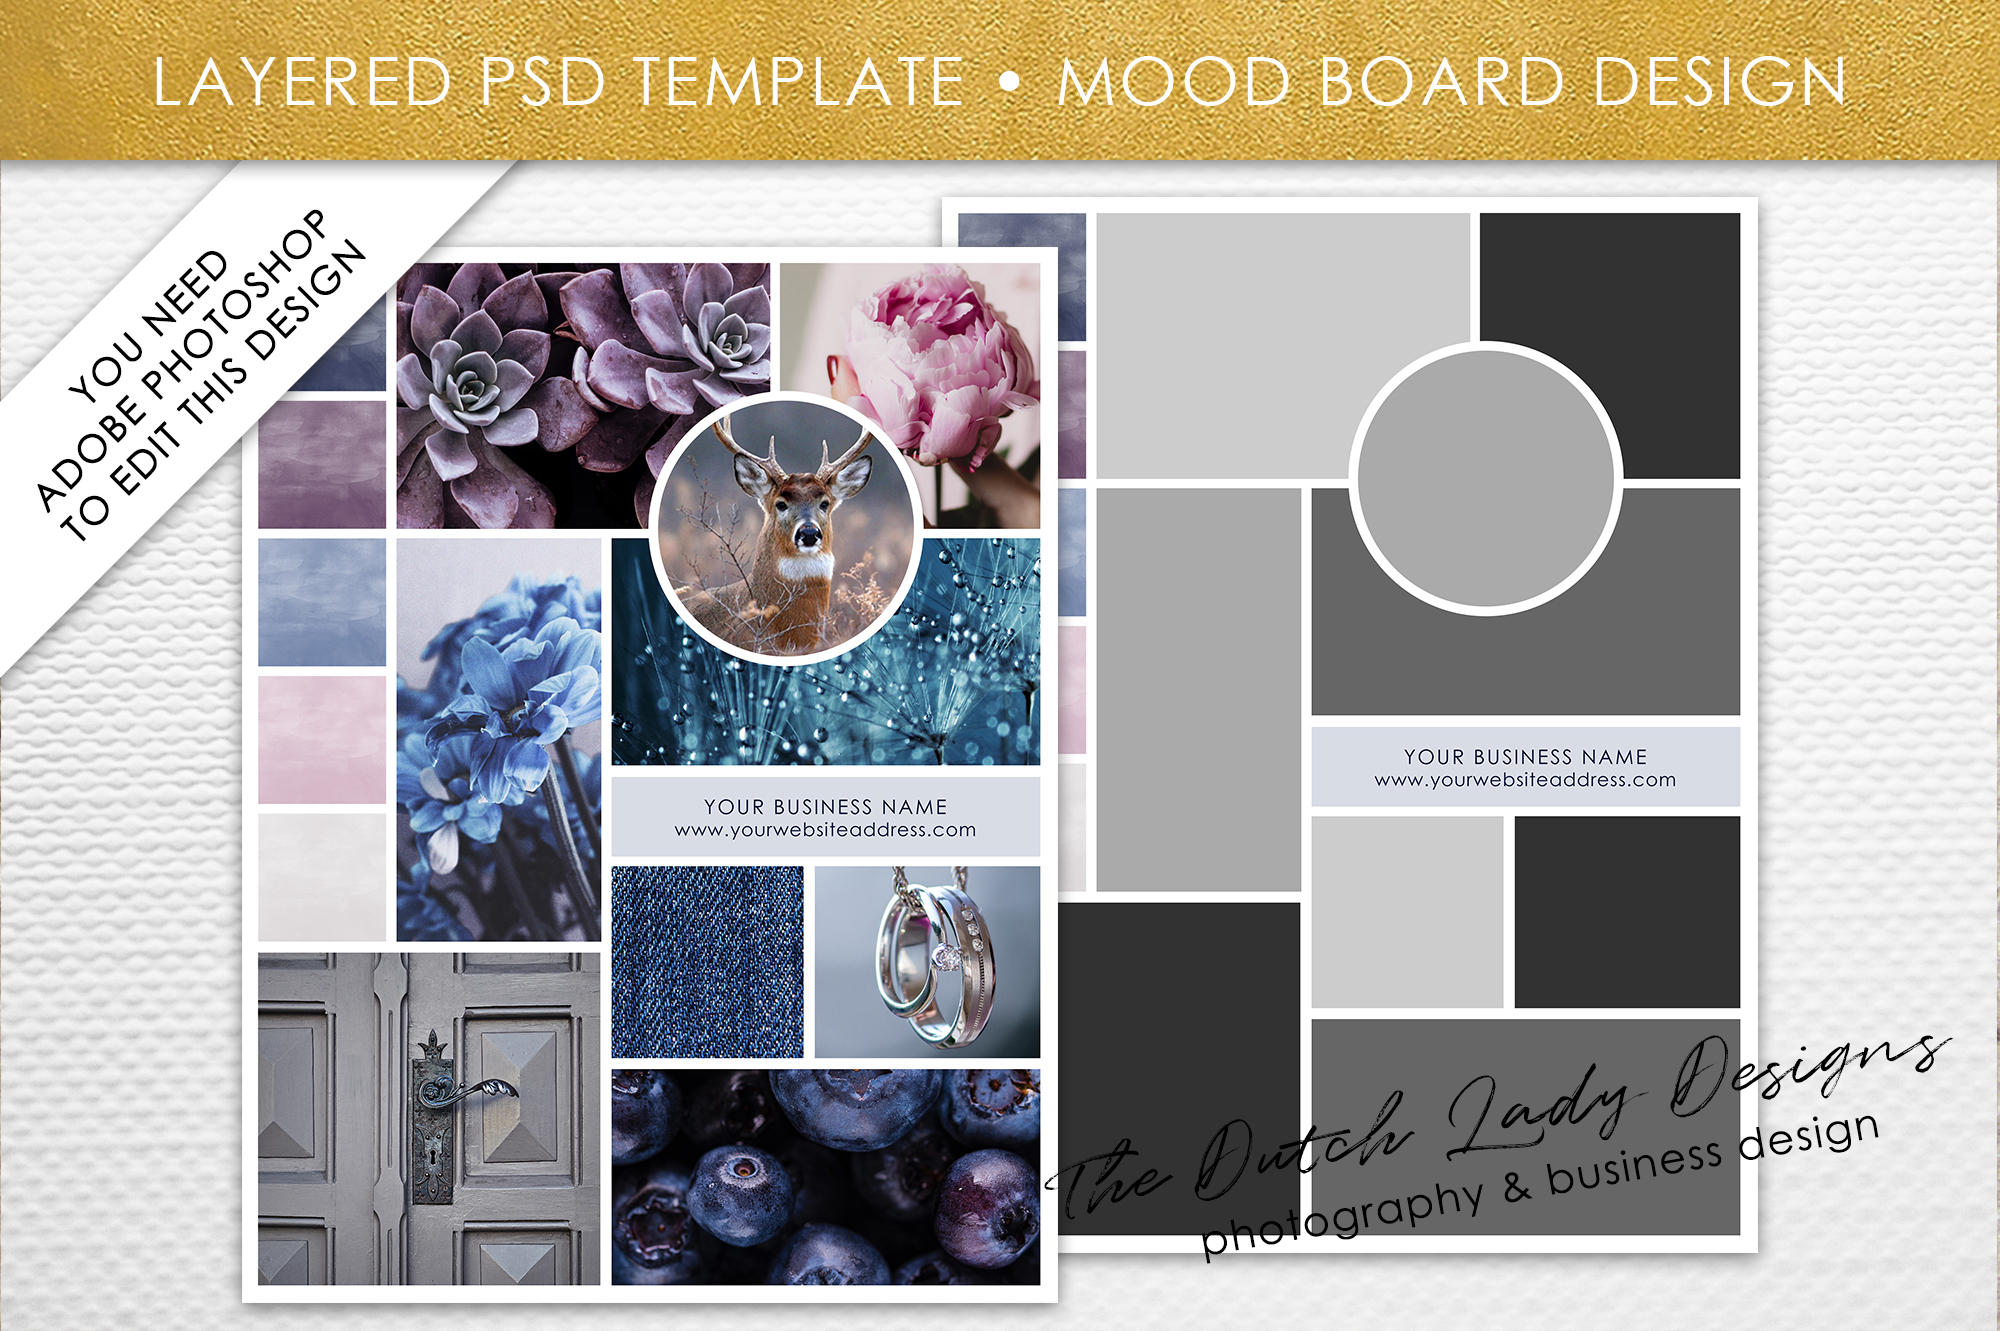 Mood & Vision Board Template for Adobe Photoshop - Layered PSD Template